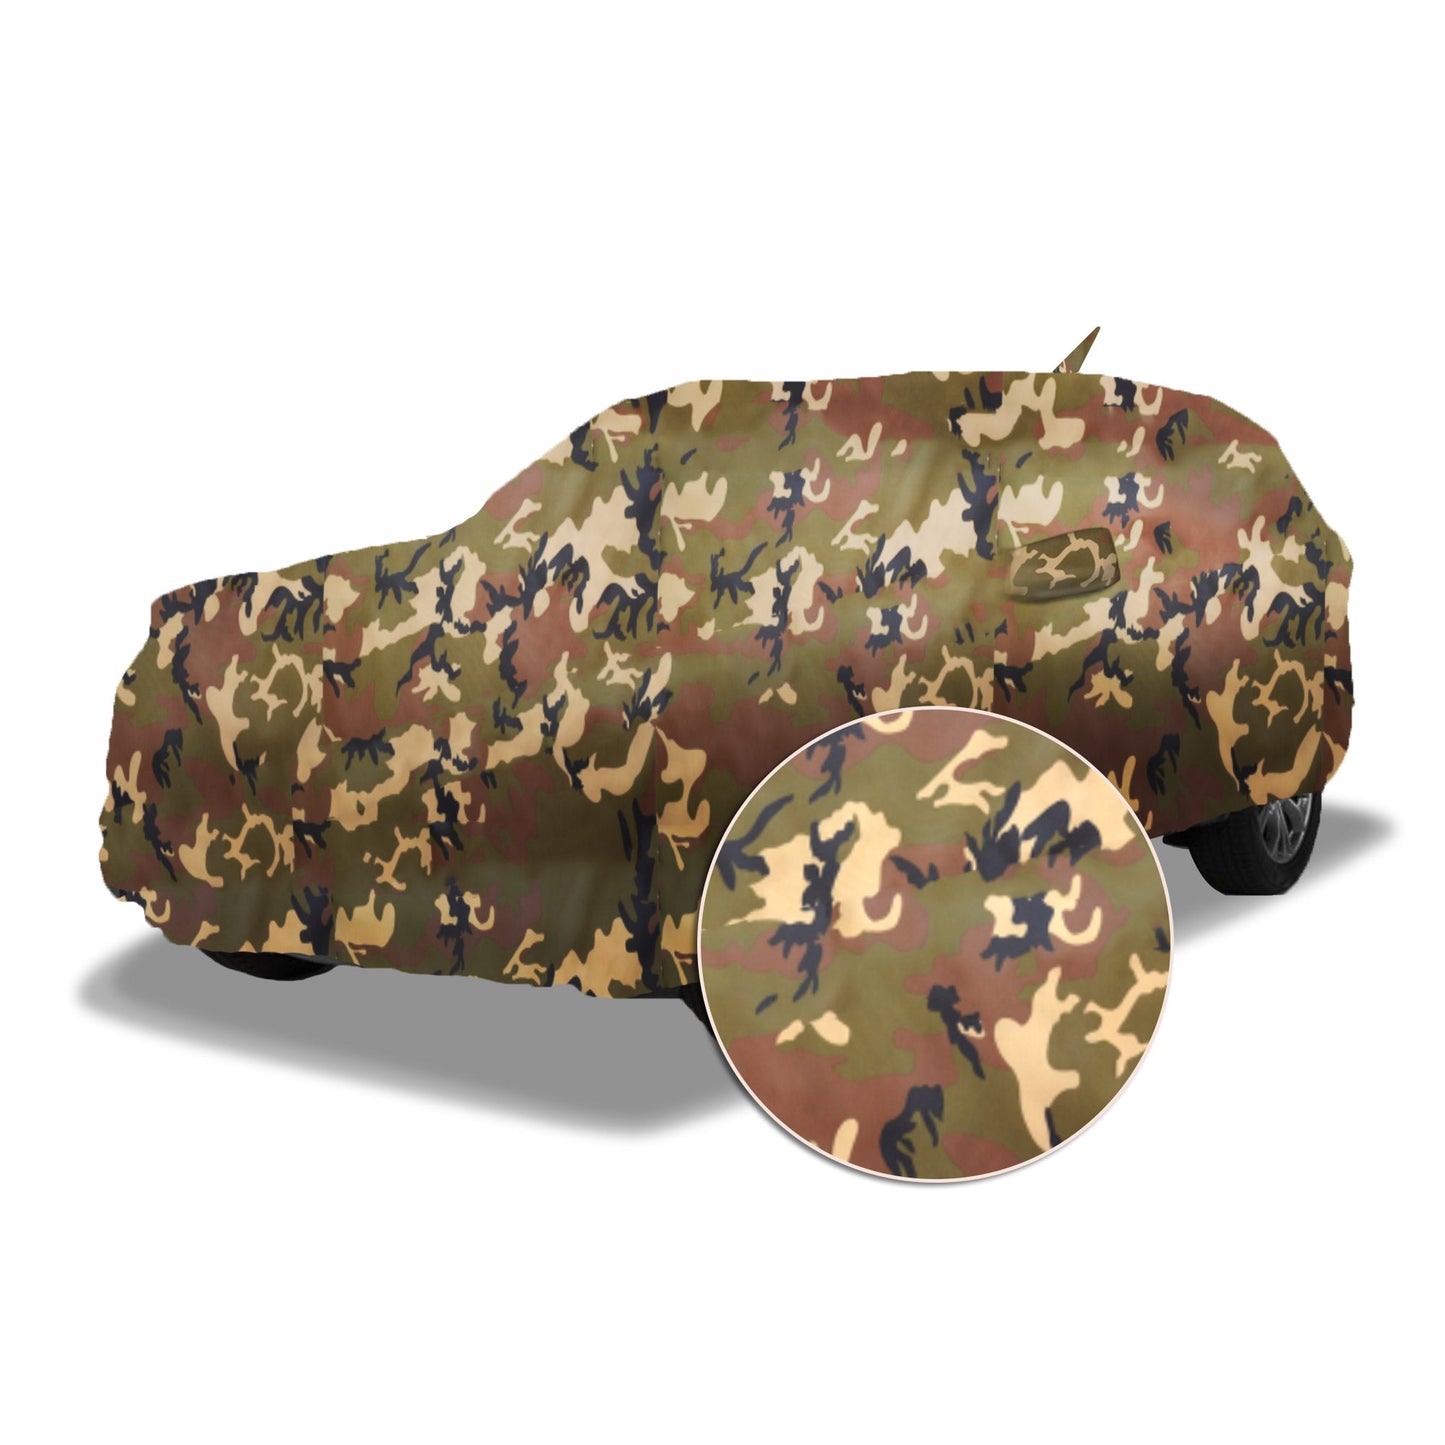 Ascot Maruti 800 Car Body Cover Extra Strong & Dust Proof Jungle Military Car Cover with UV Proof & Water-Resistant Coating